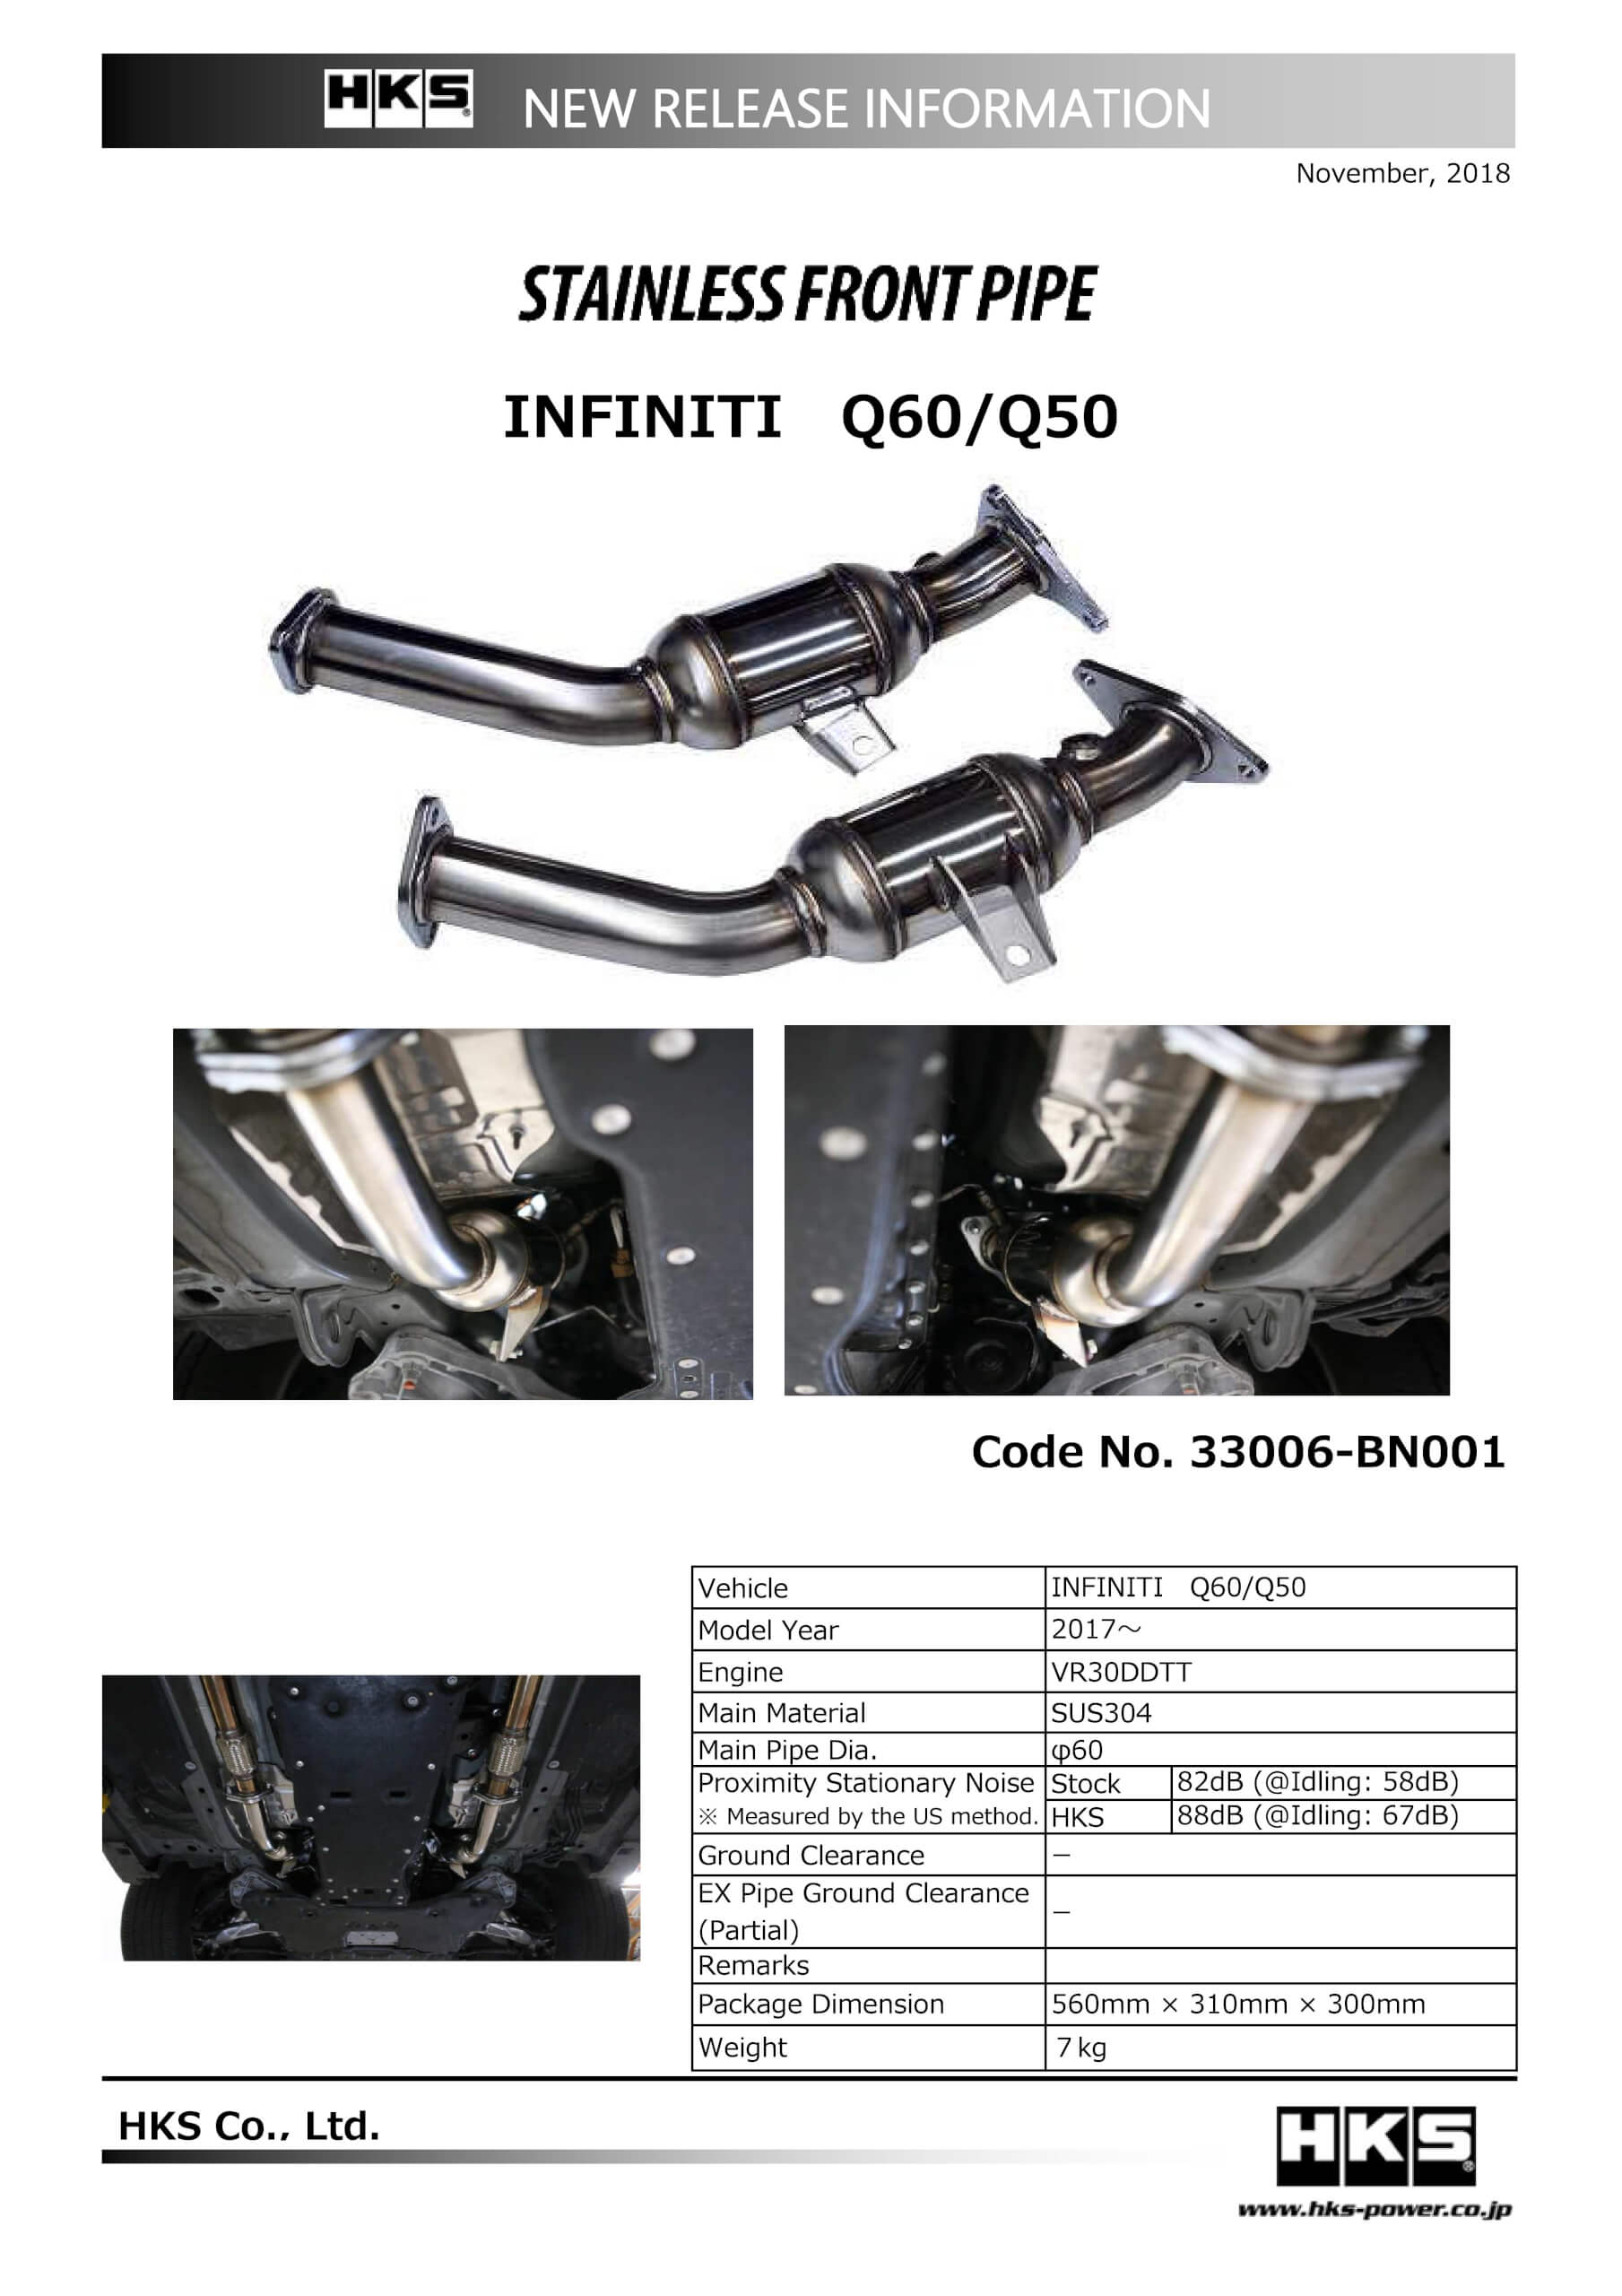 STAINLESS FRONT PIPE for INFINITI Q60Q50.jpg